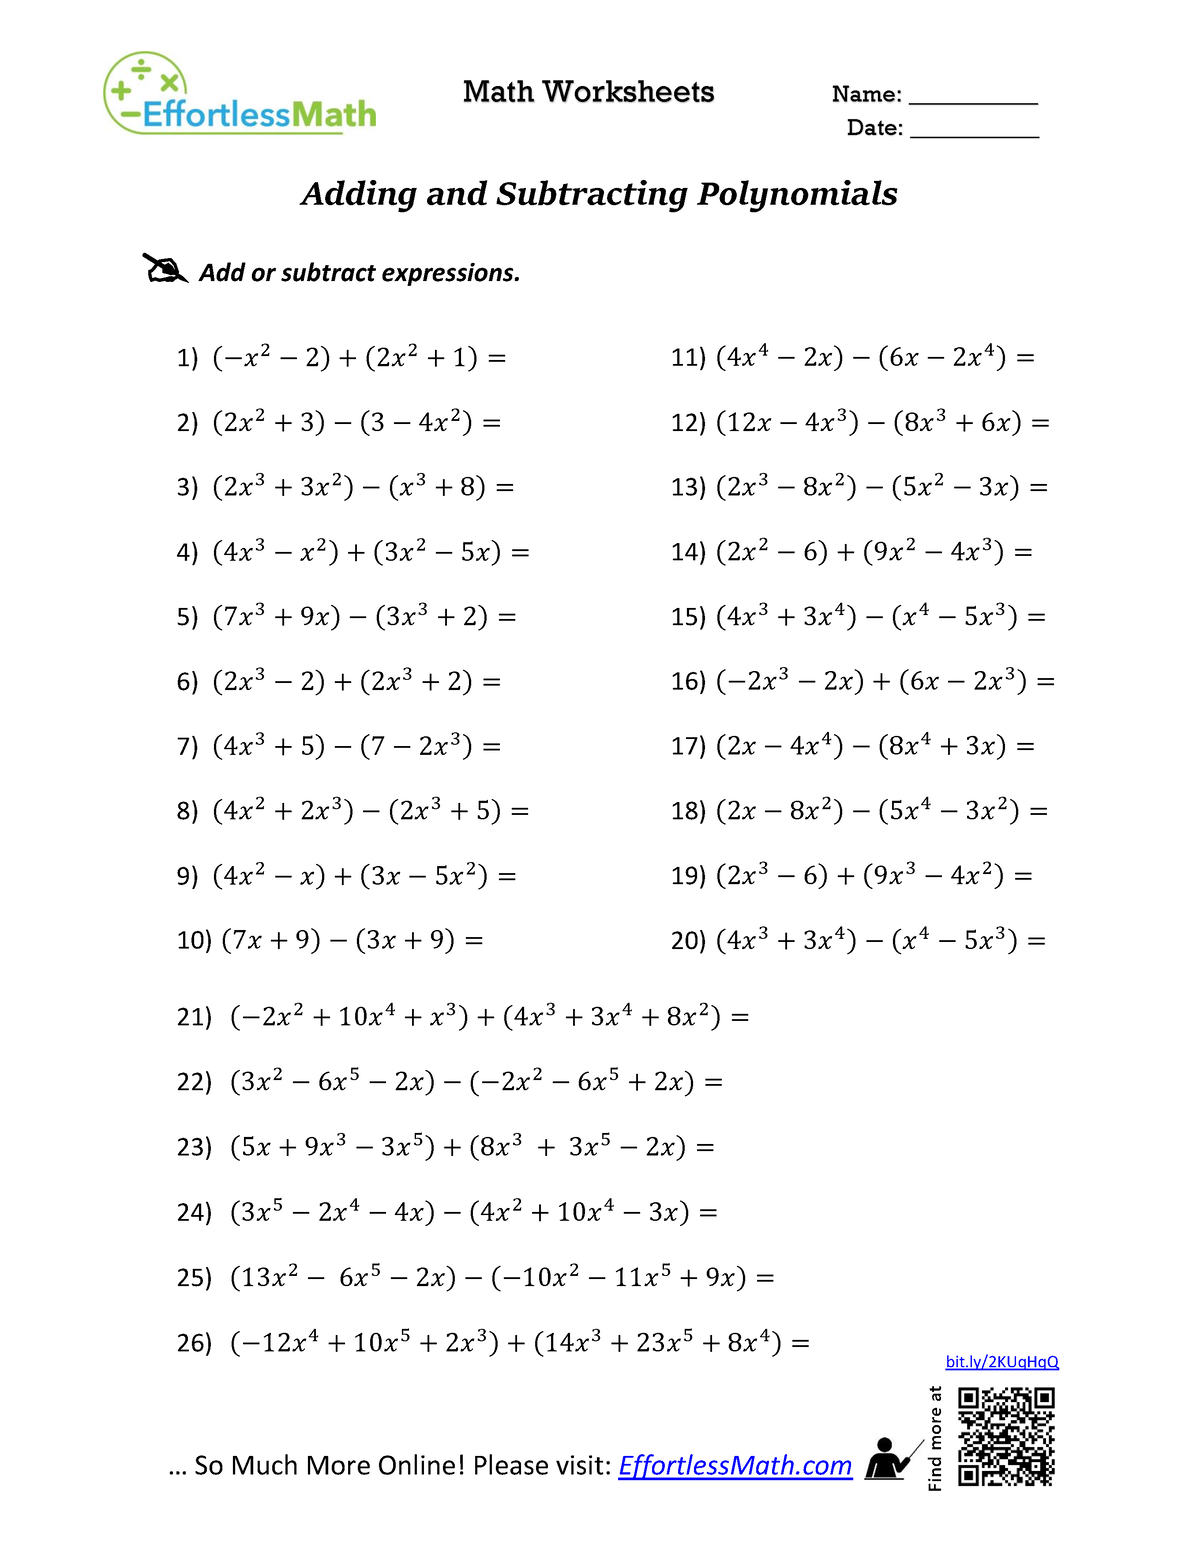 adding-and-subtracting-polynomials-math-worksheets-name-date-so